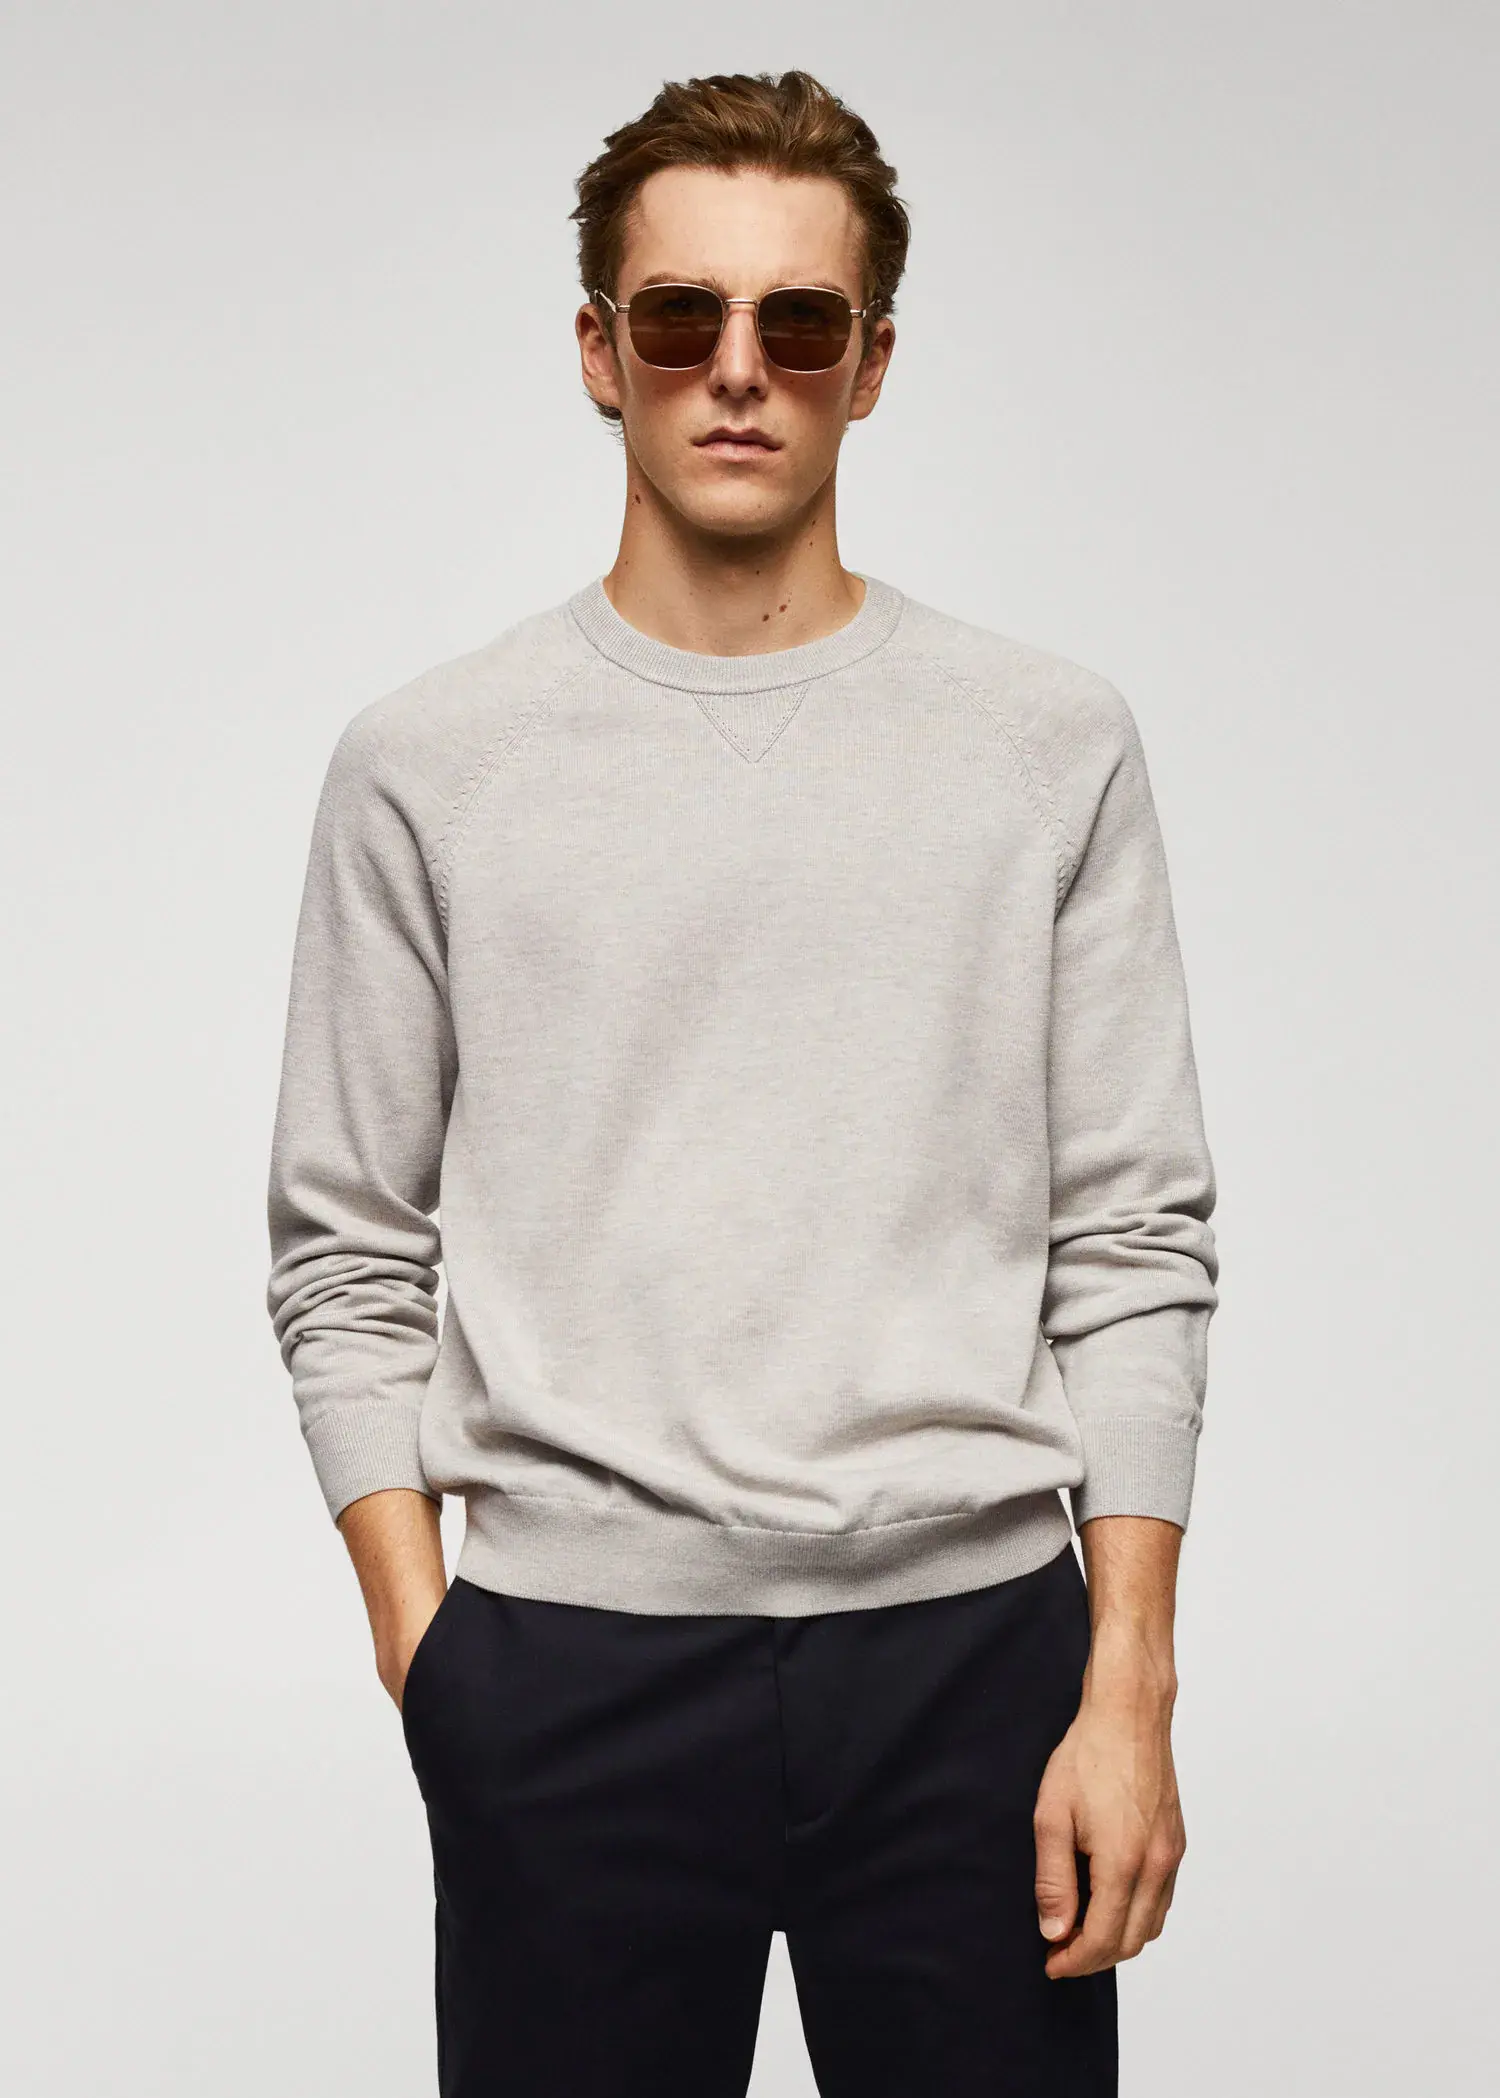 Mango Fine-knit cotton sweater. a man wearing sunglasses standing in front of a white wall. 